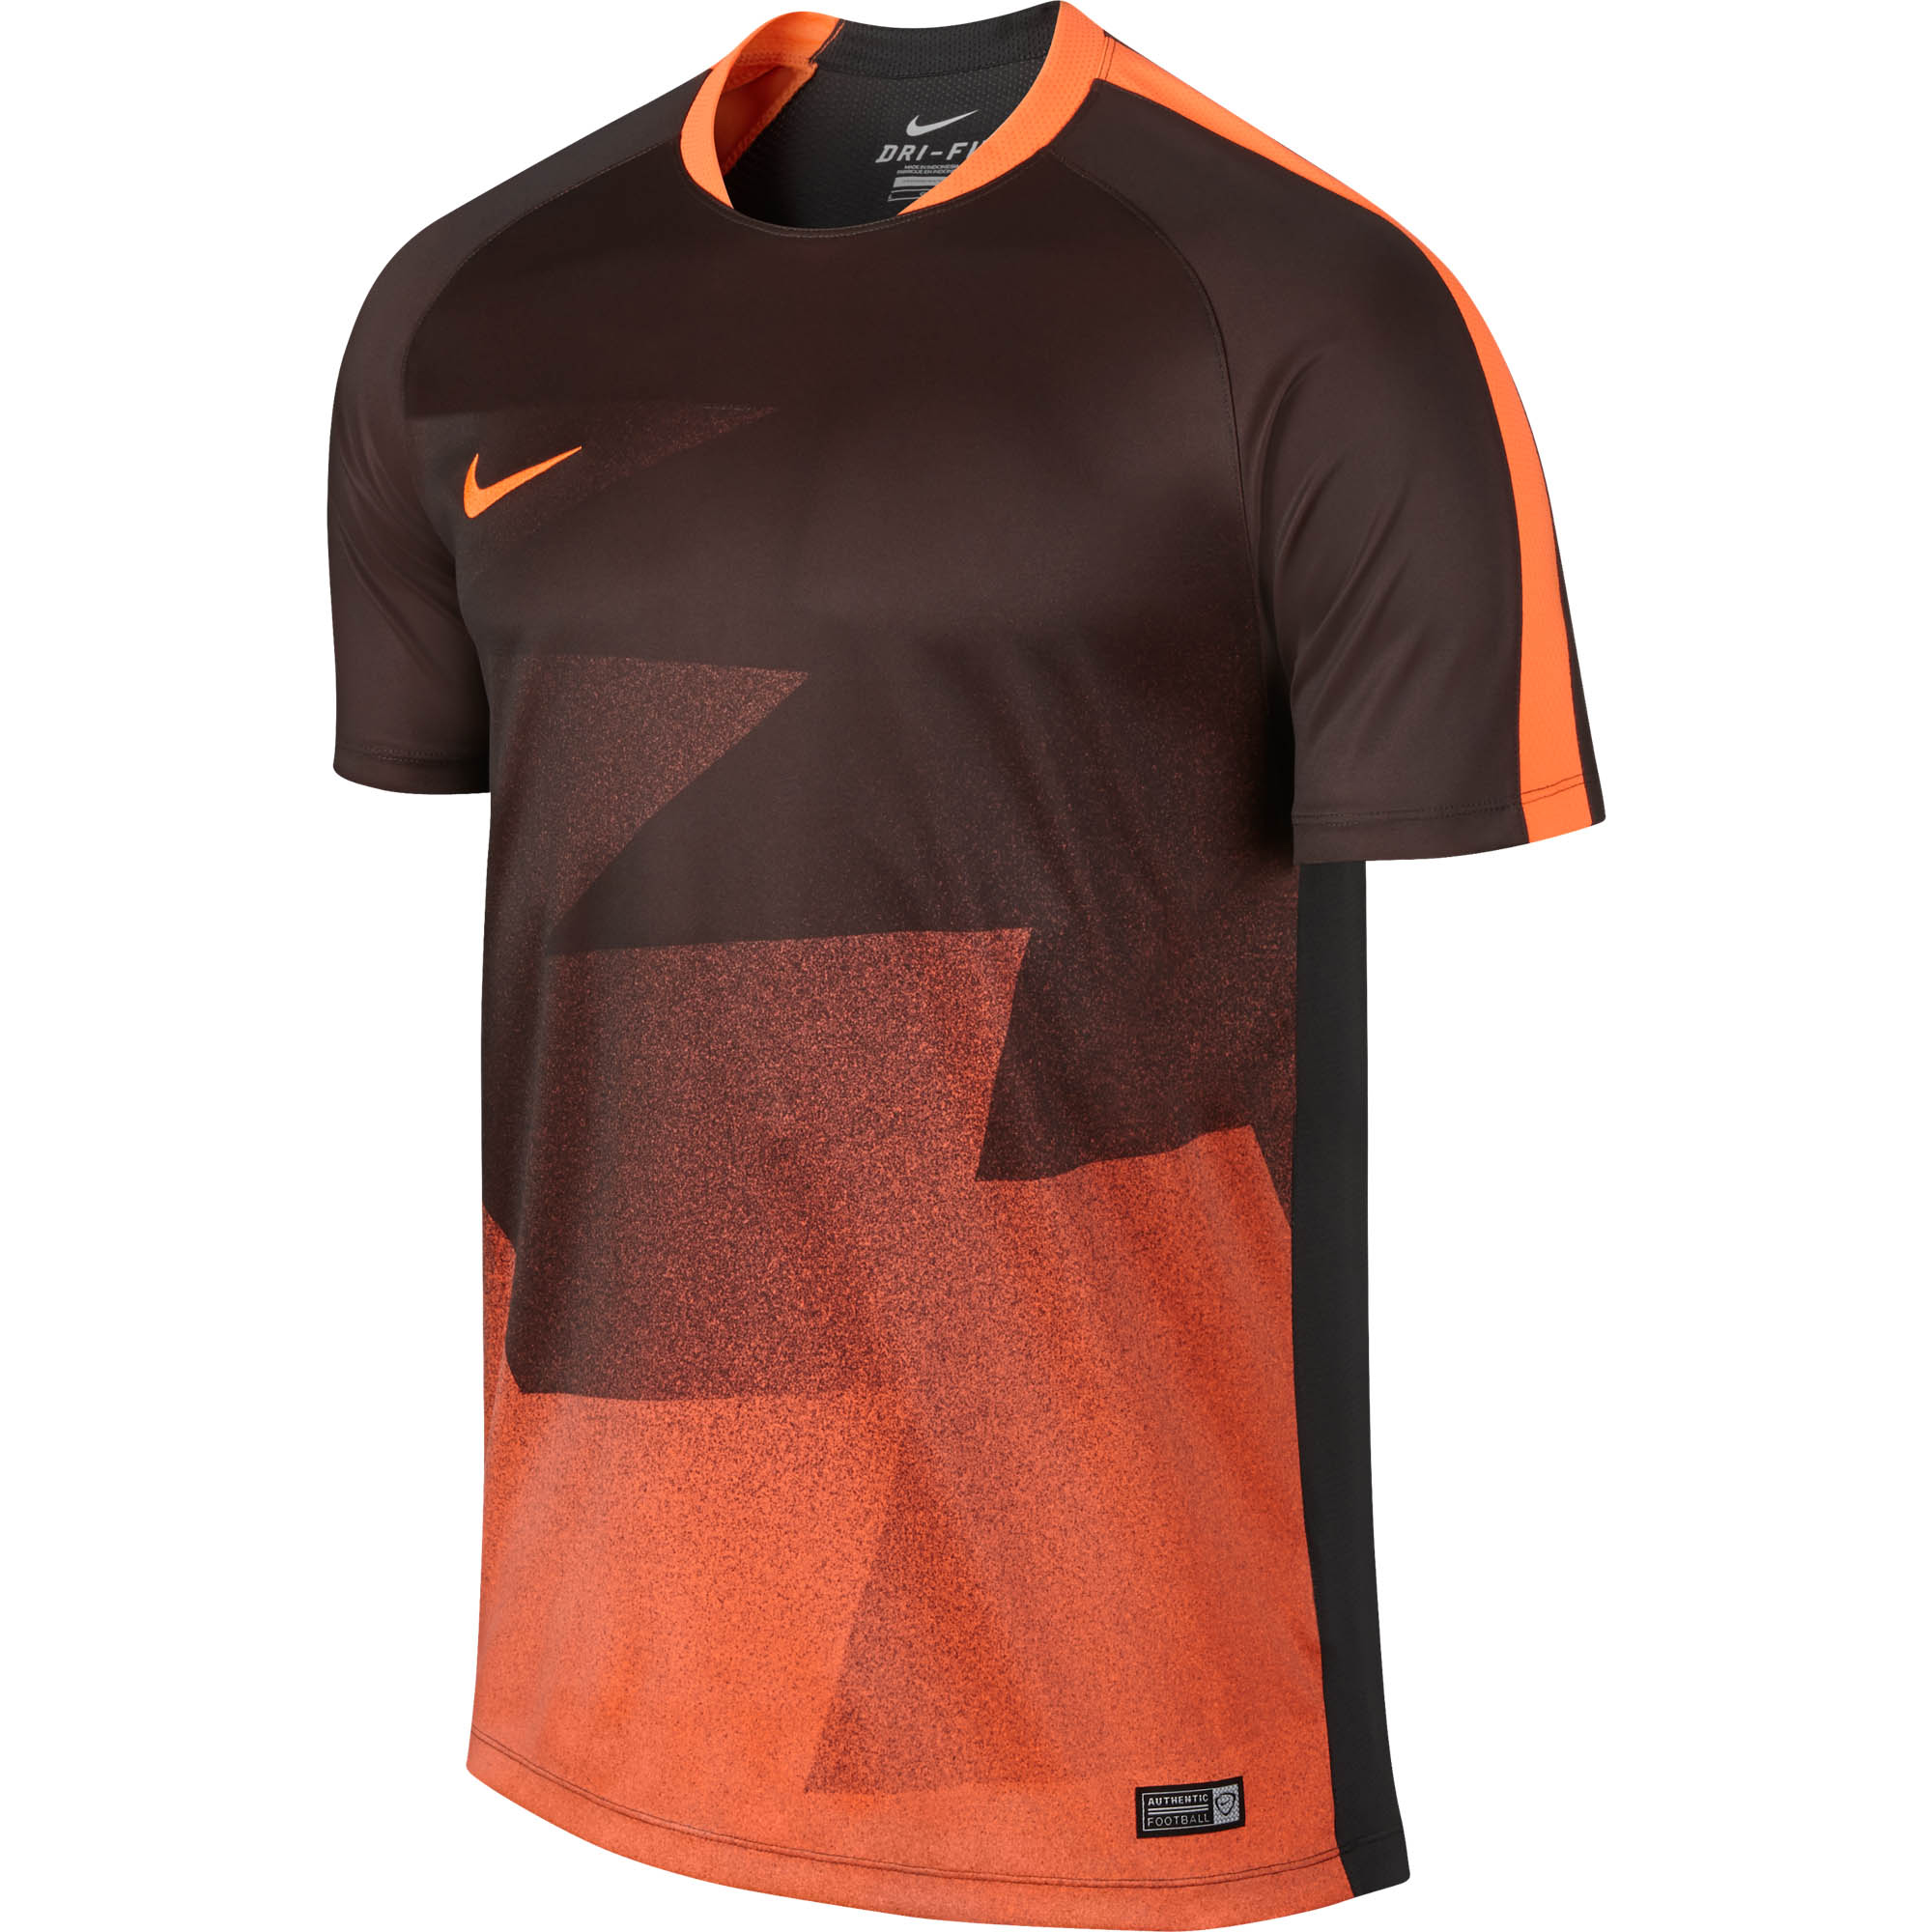 Nike GPX Training Top - and Orange - Soccer